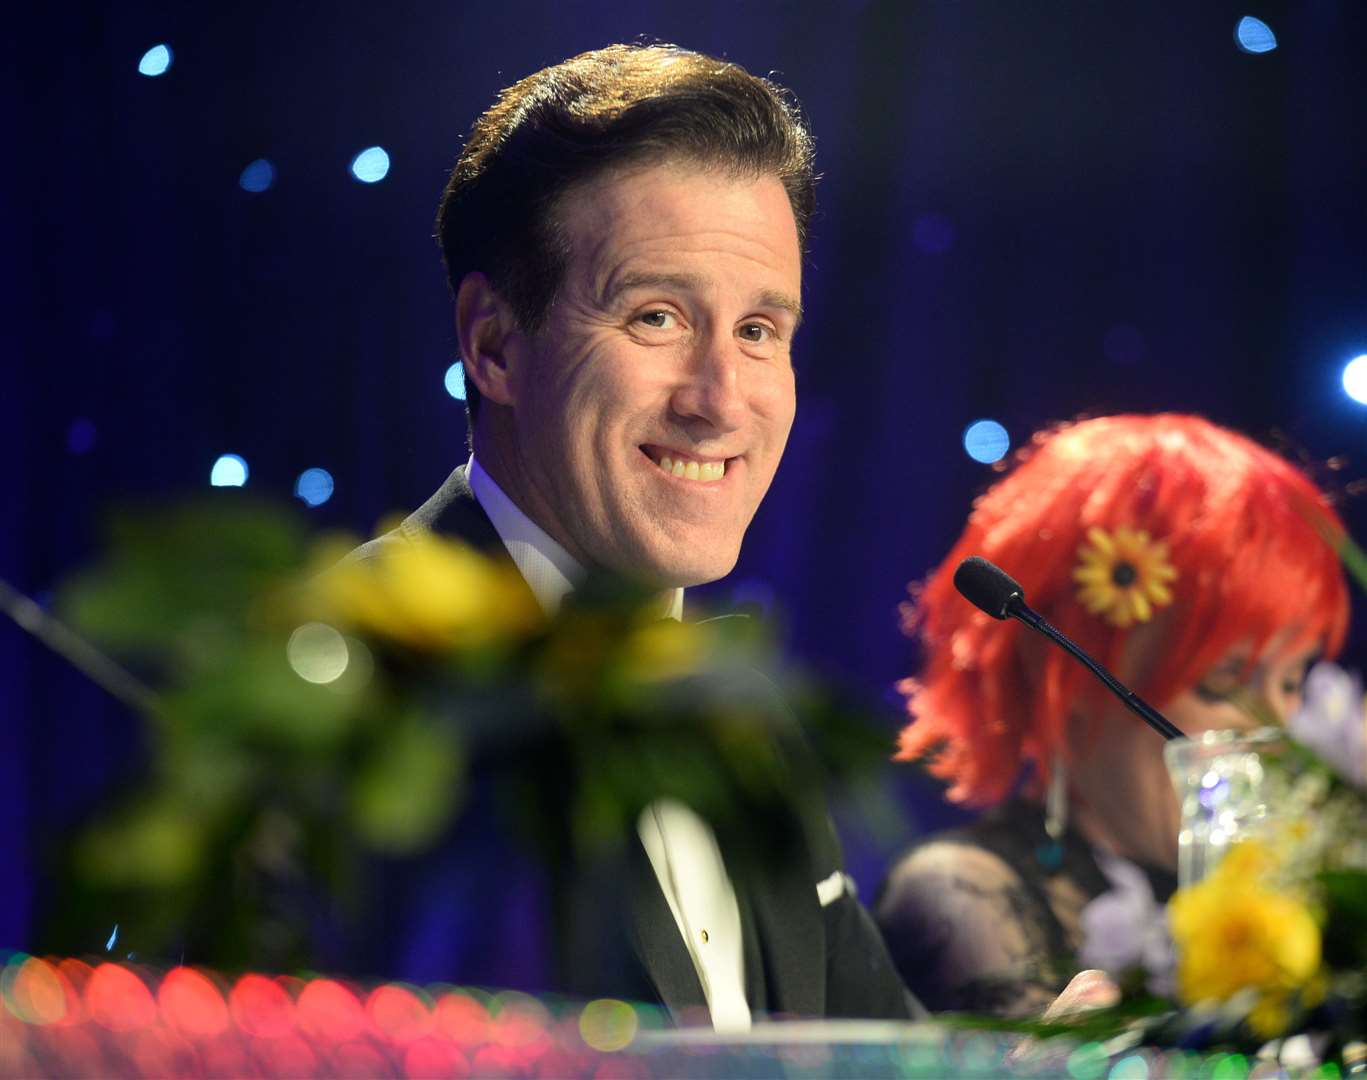 Celebrity judge Anton Du Beke at this year's Strictly Inverness final.